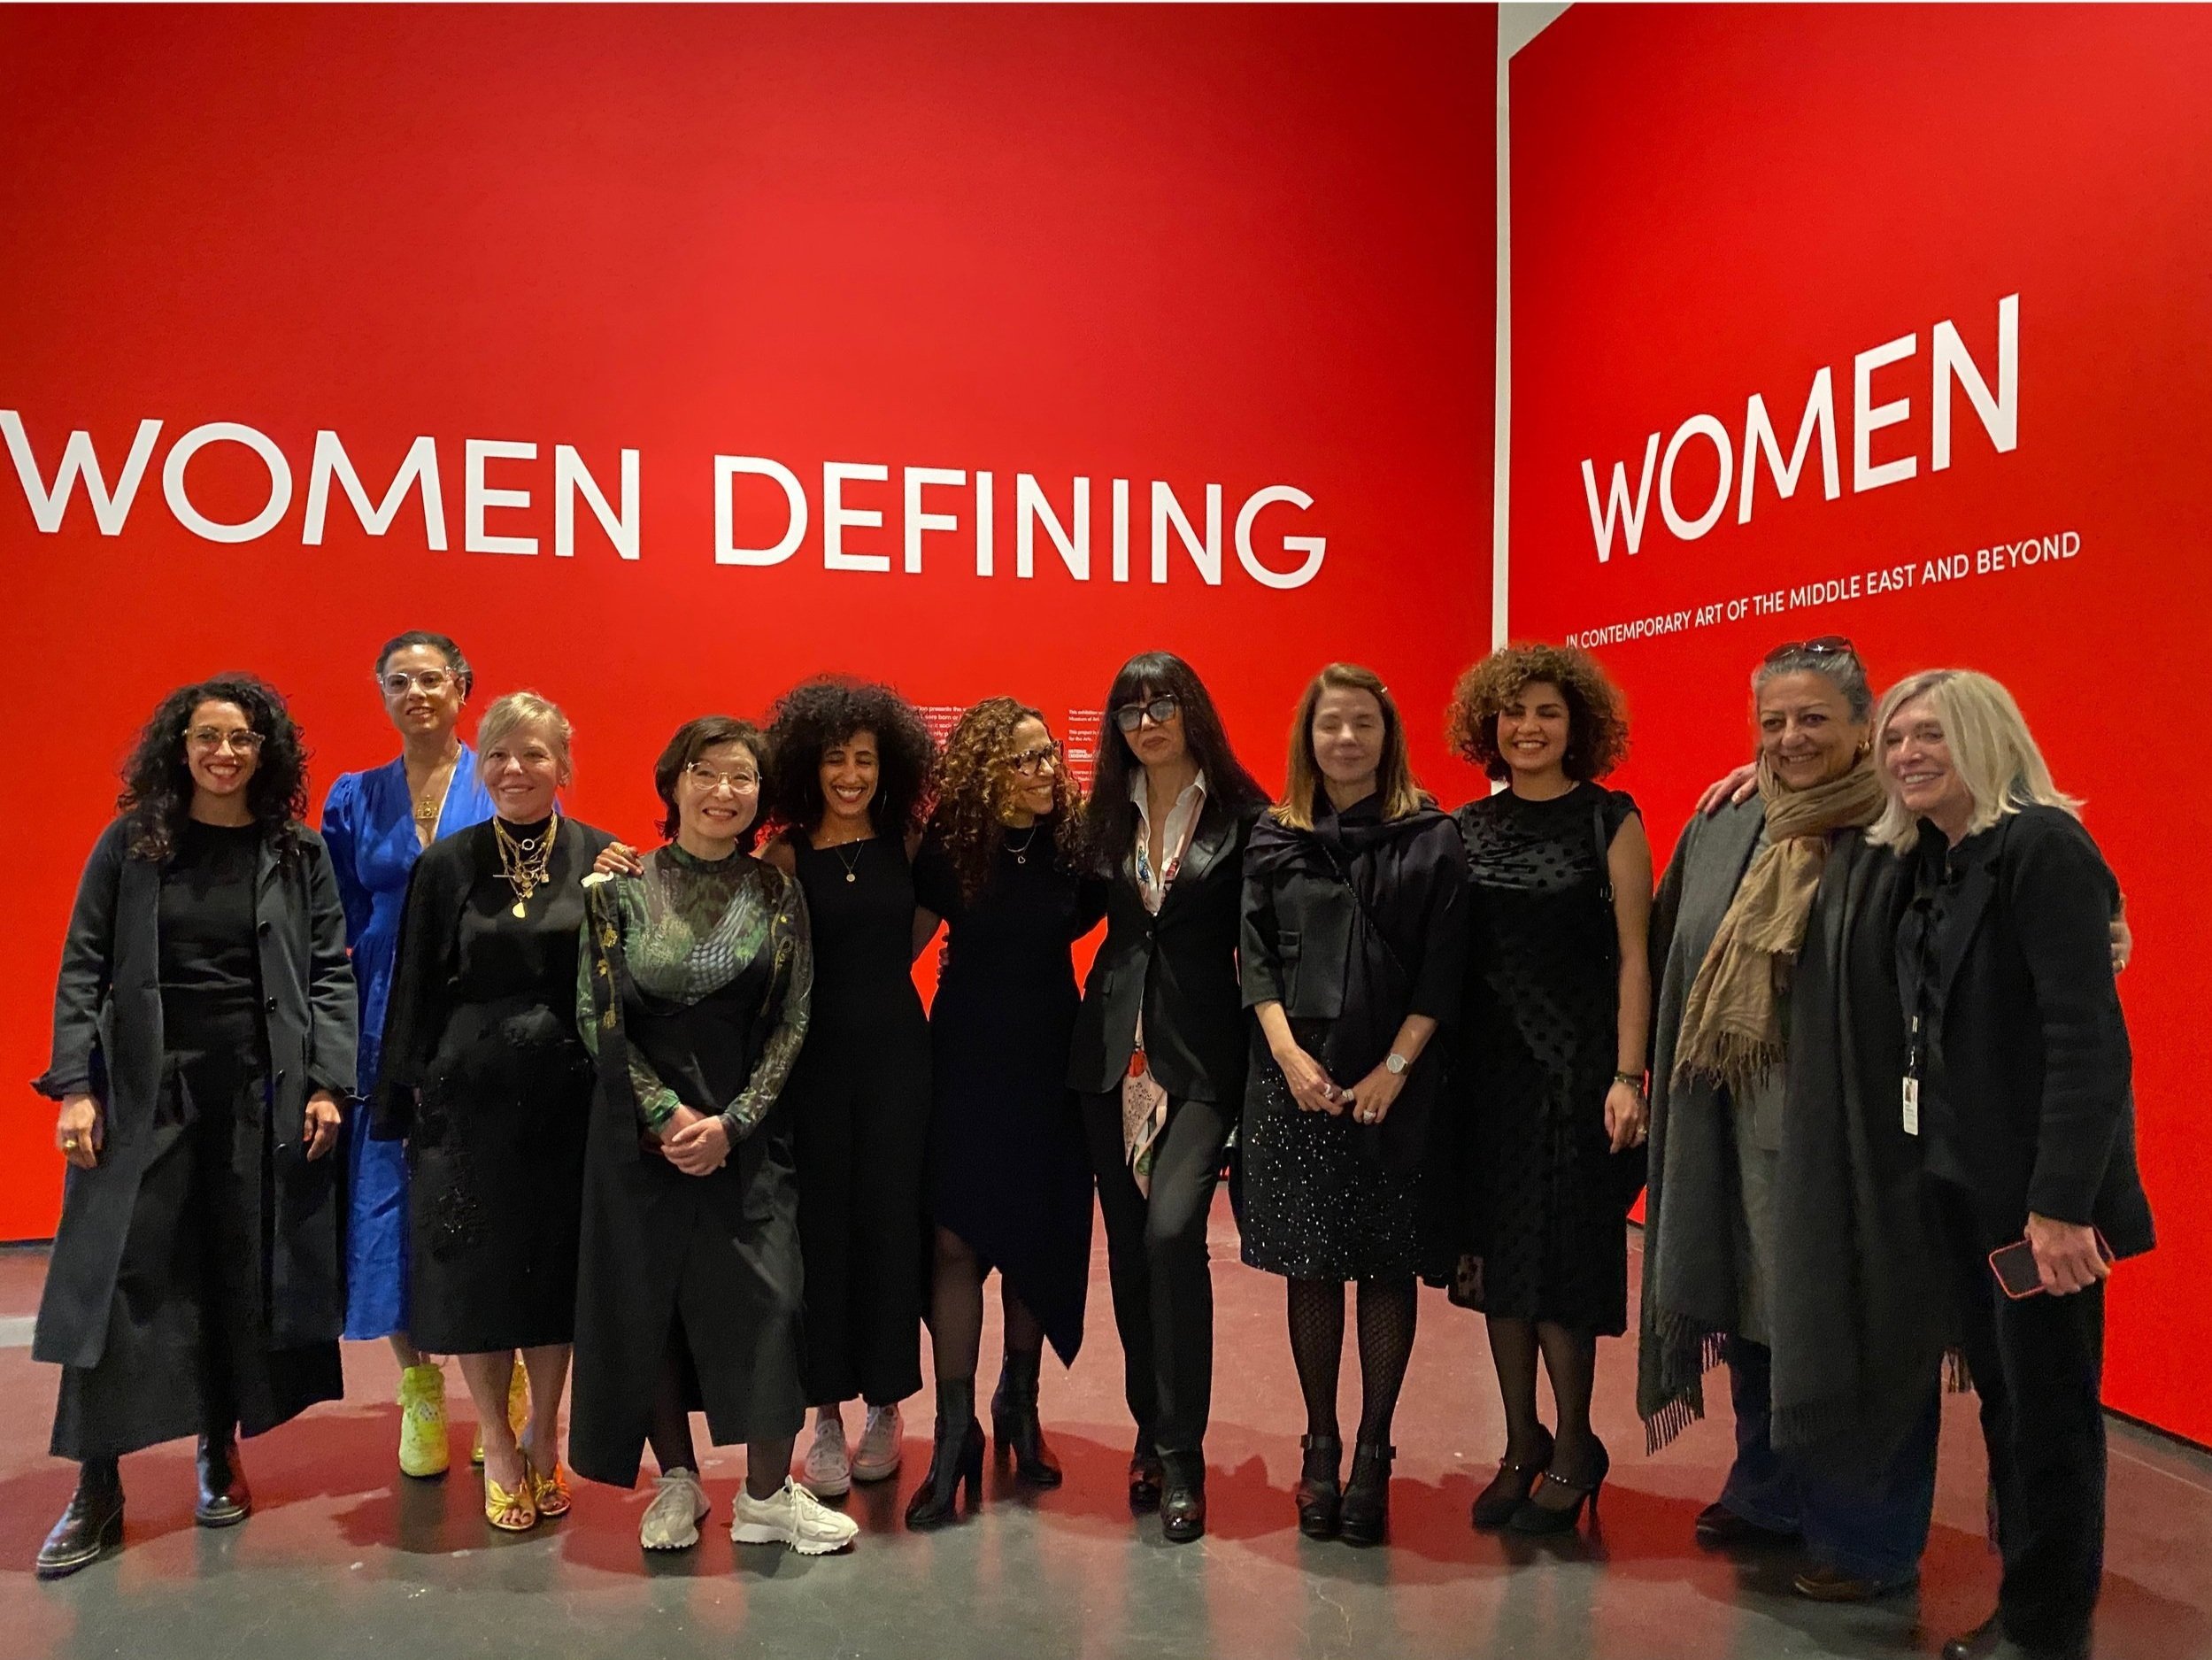 2023 LACMA: Women Defining Women in Contemporary Art of the Middle East and Beyon